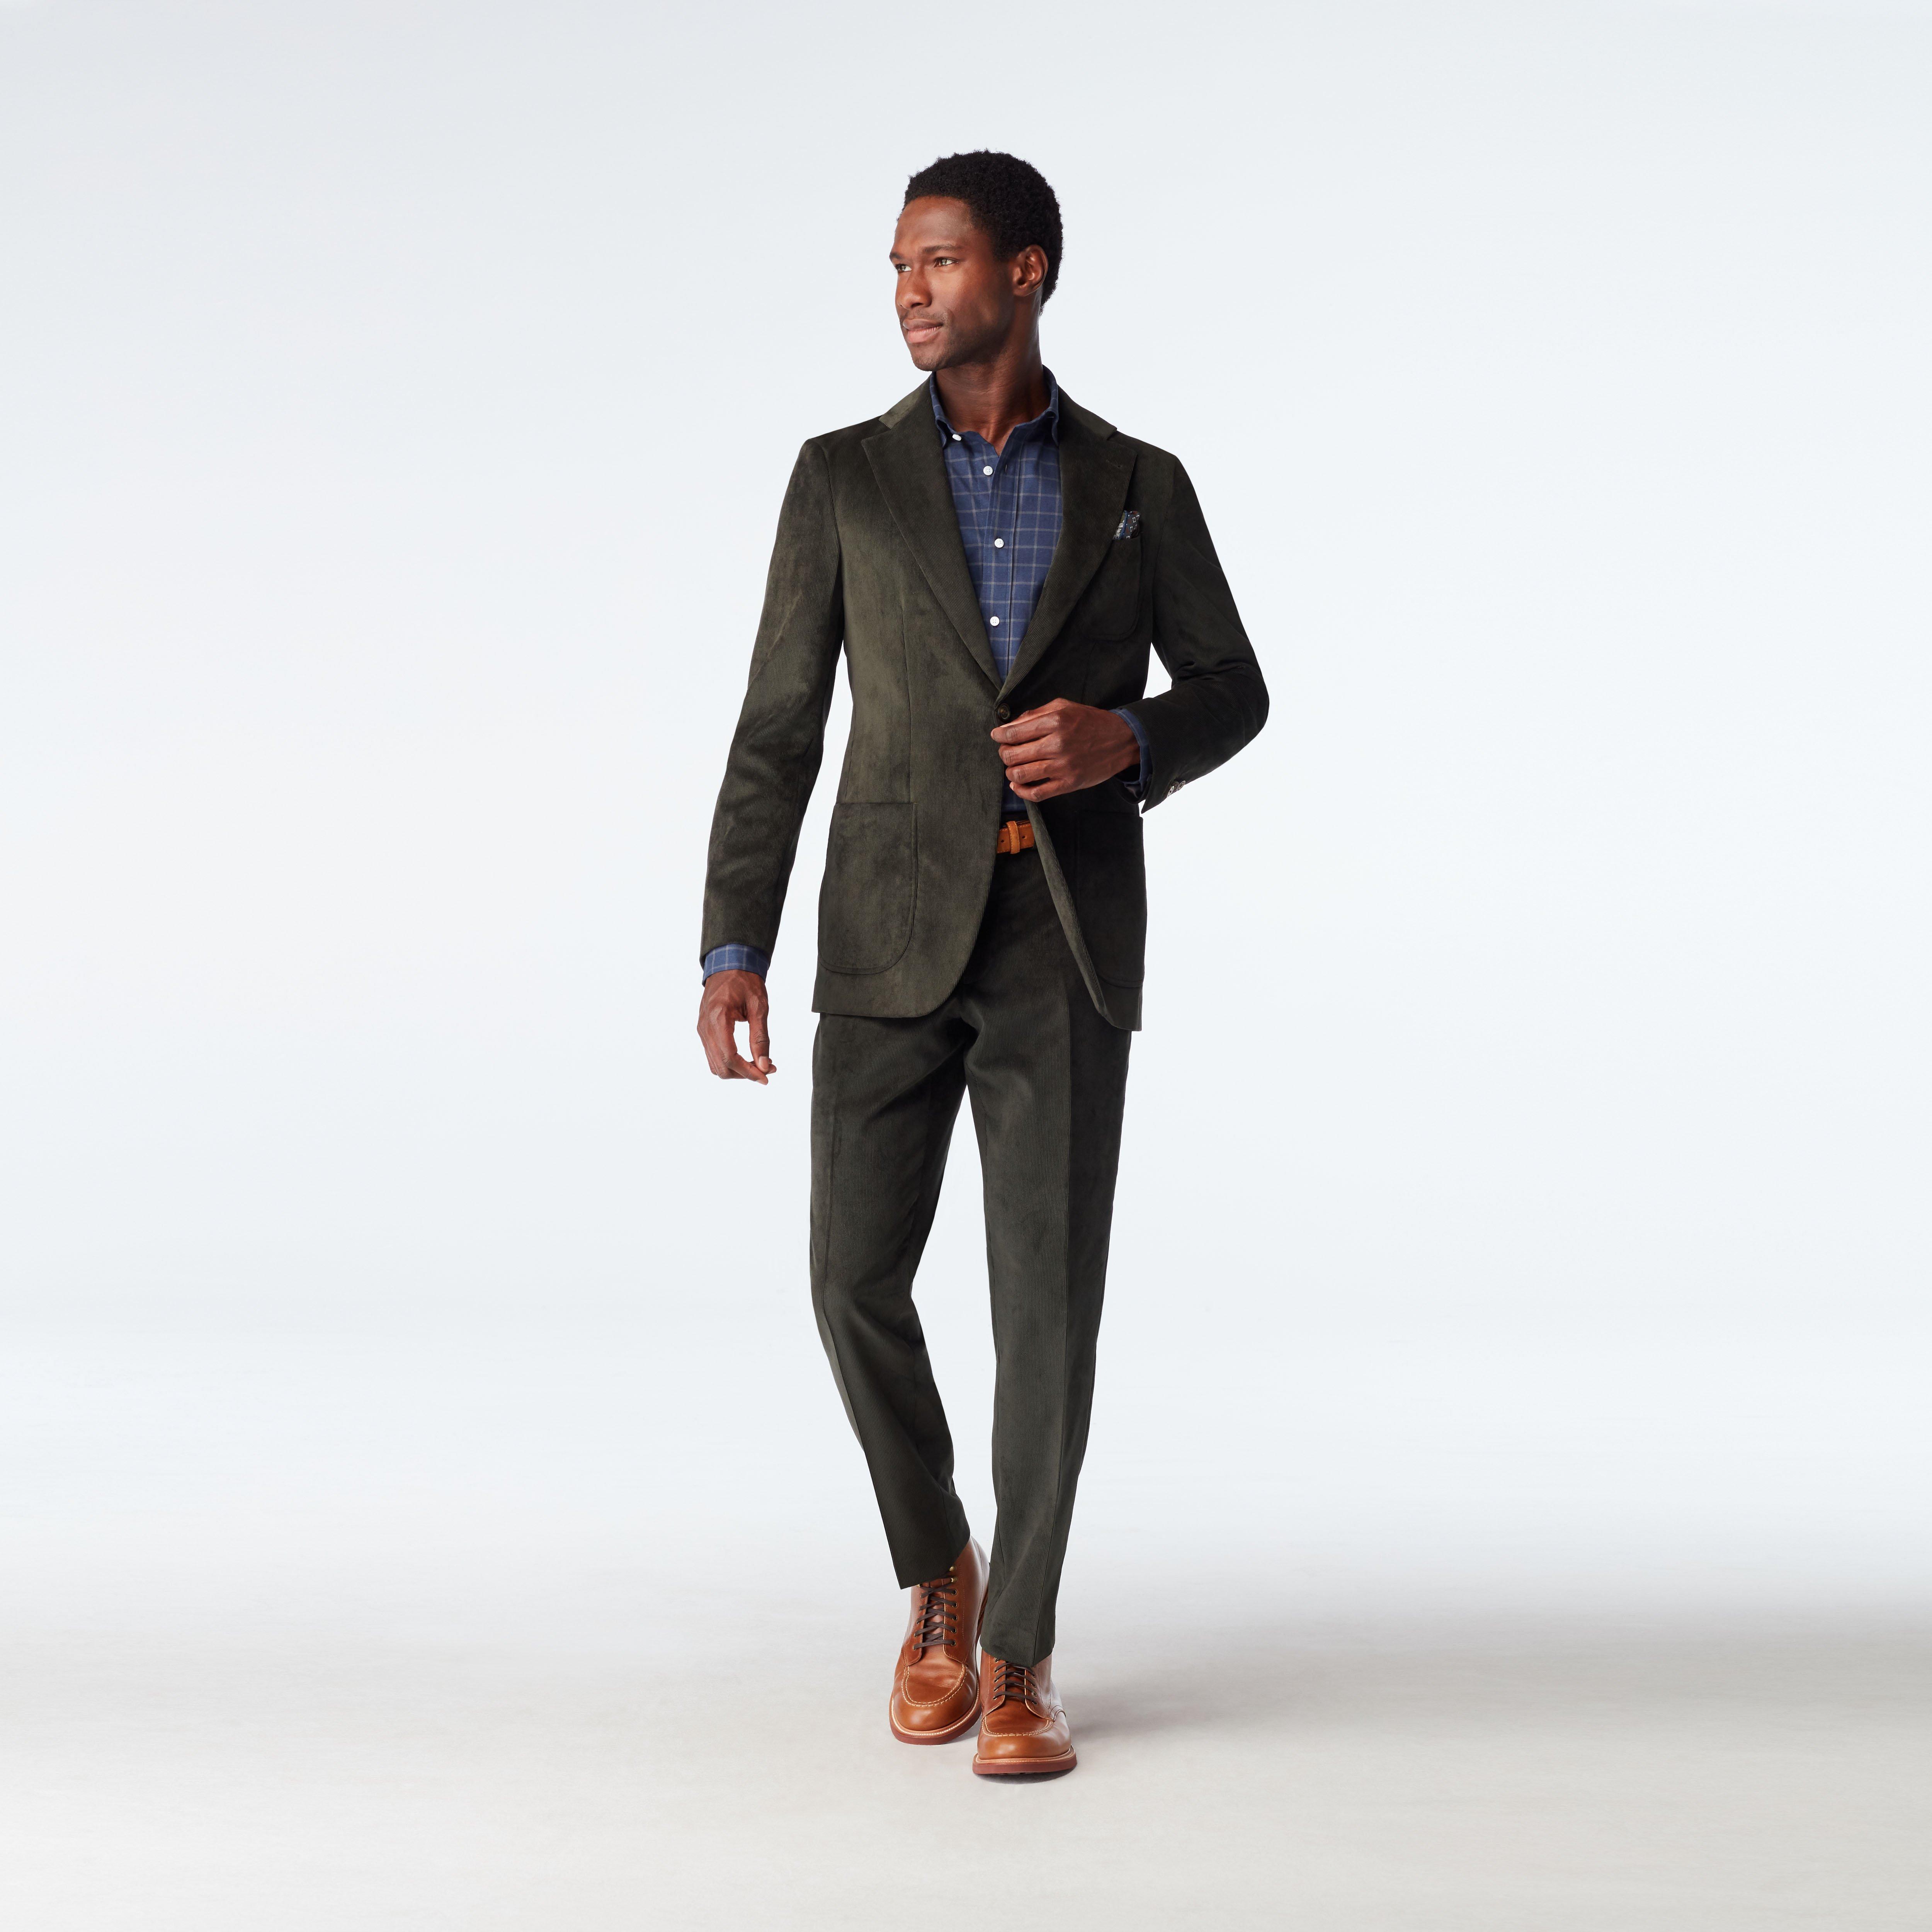 Custom Suits Made For You - Flaxton Corduroy Olive Suit | INDOCHINO